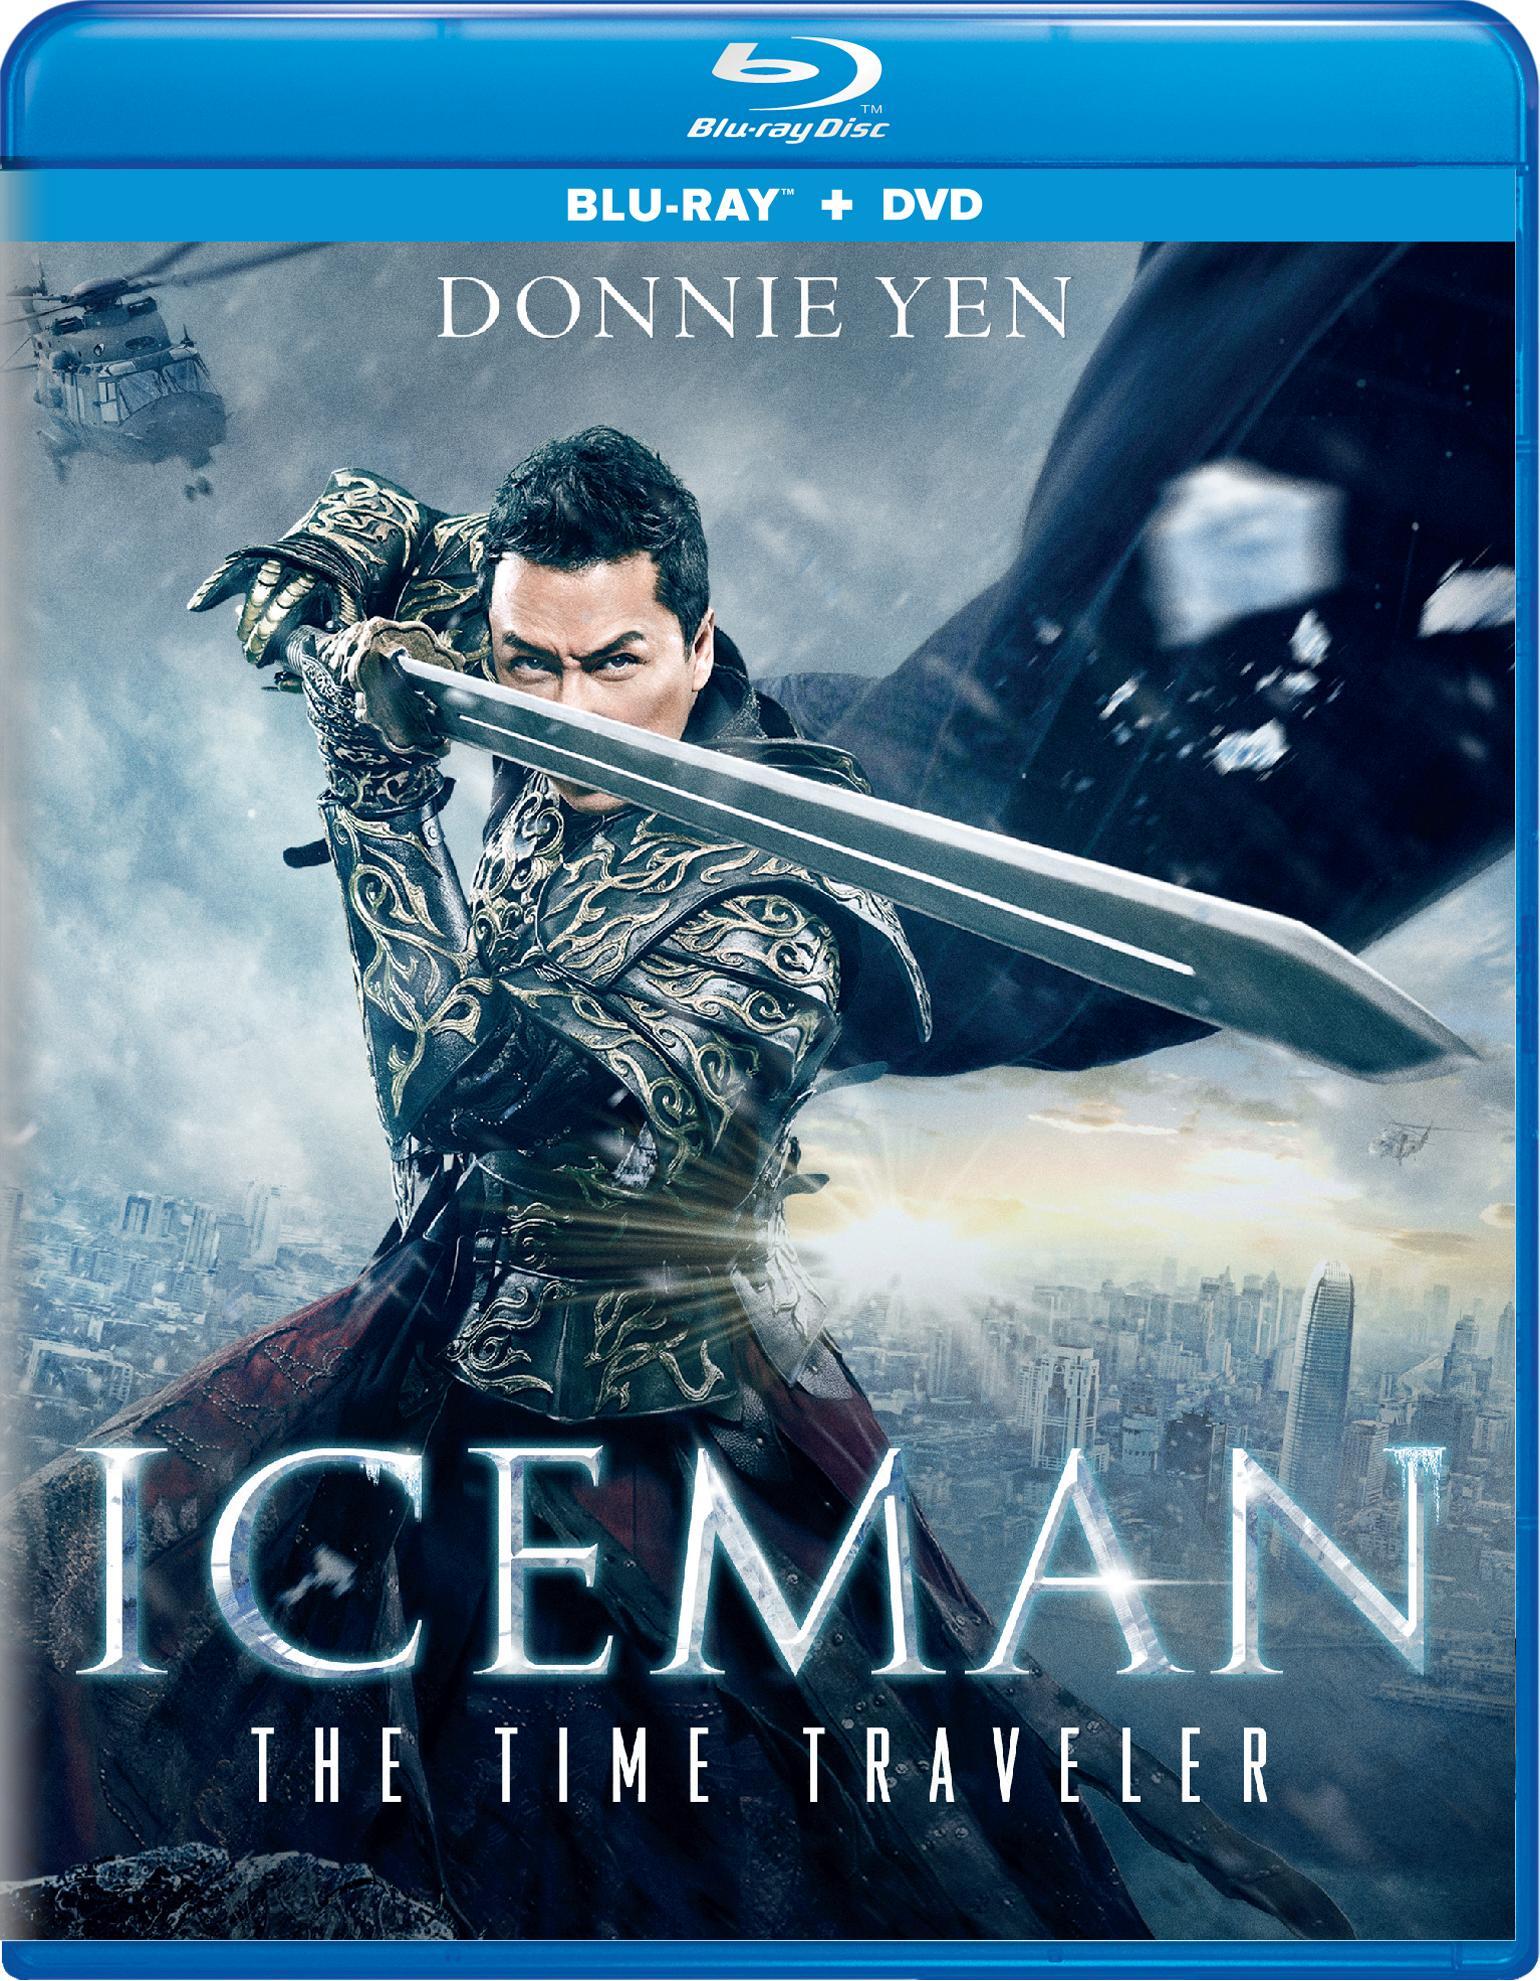 Buy Iceman: The Time Traveler with DVD Blu-ray | GRUV